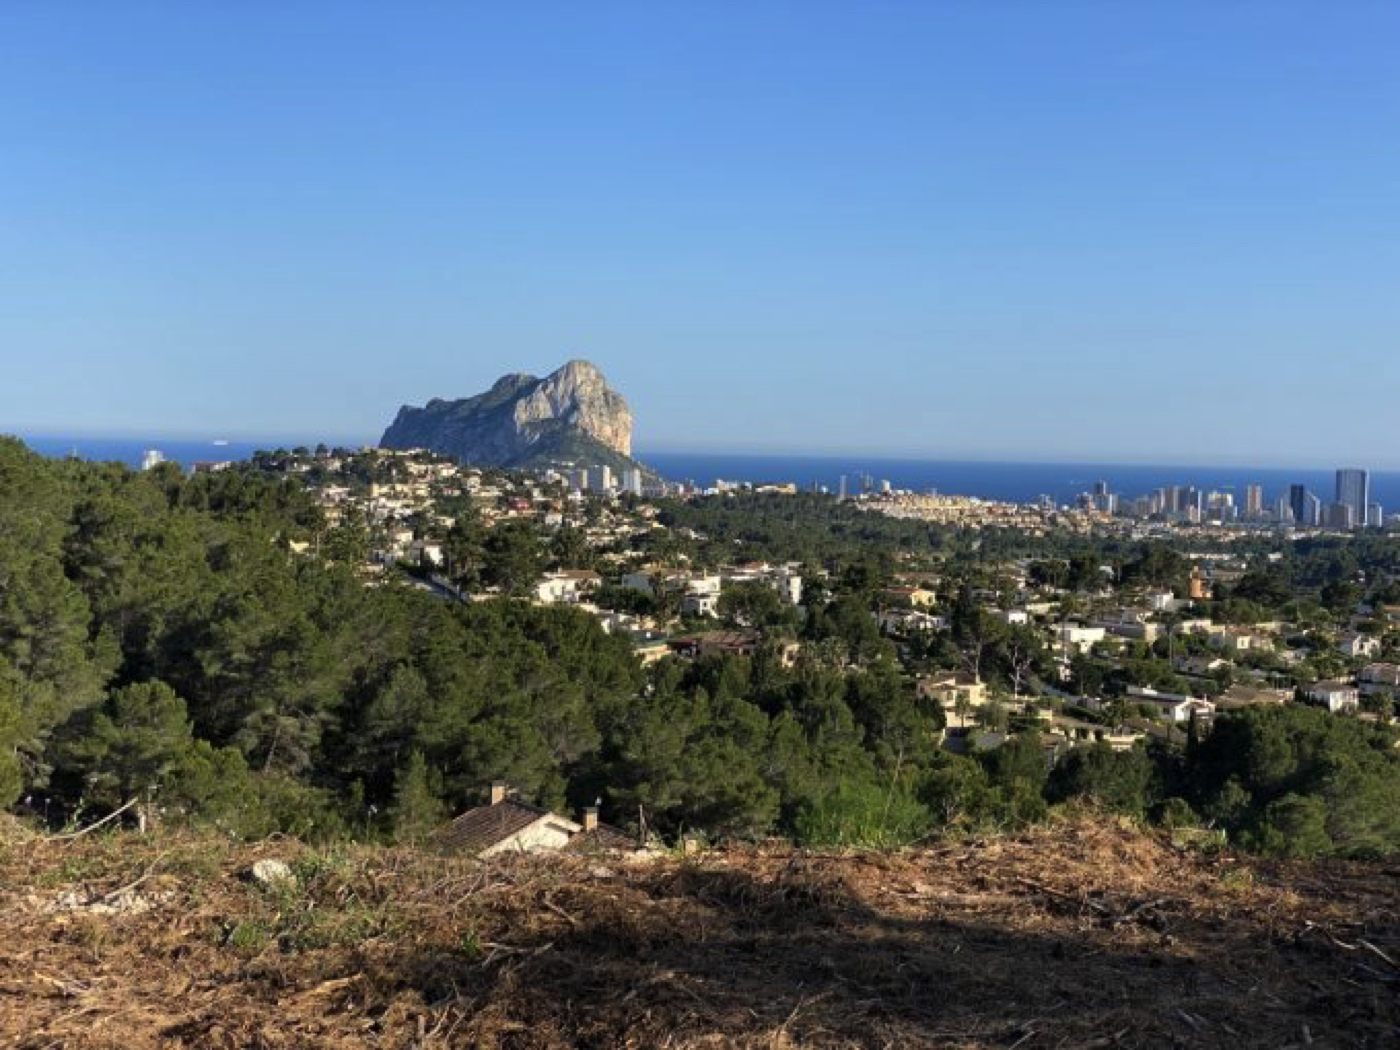 Magnificent IBIZA new construction in Calpe with nice “Peñón Ifach” views